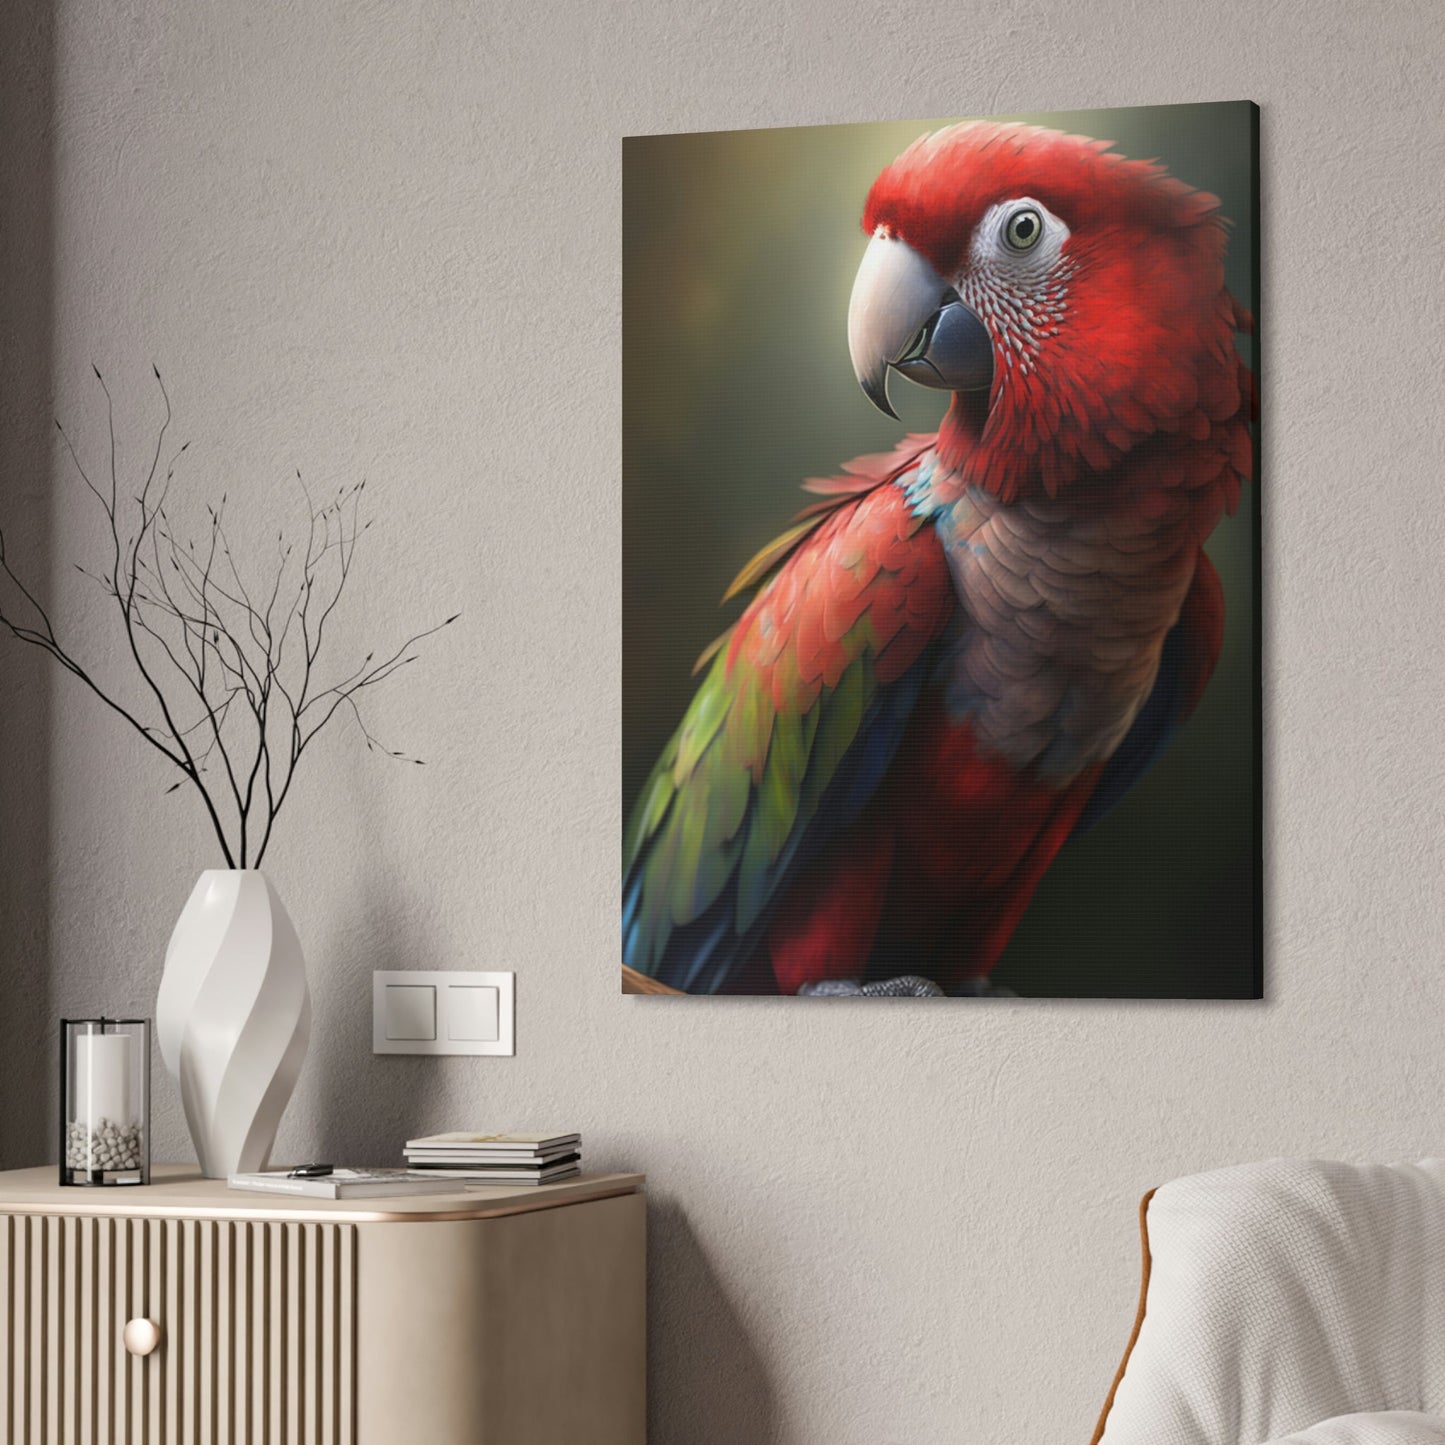 Feathered Frenzy: A Canvas of Parrot Energy and Enthusiasm